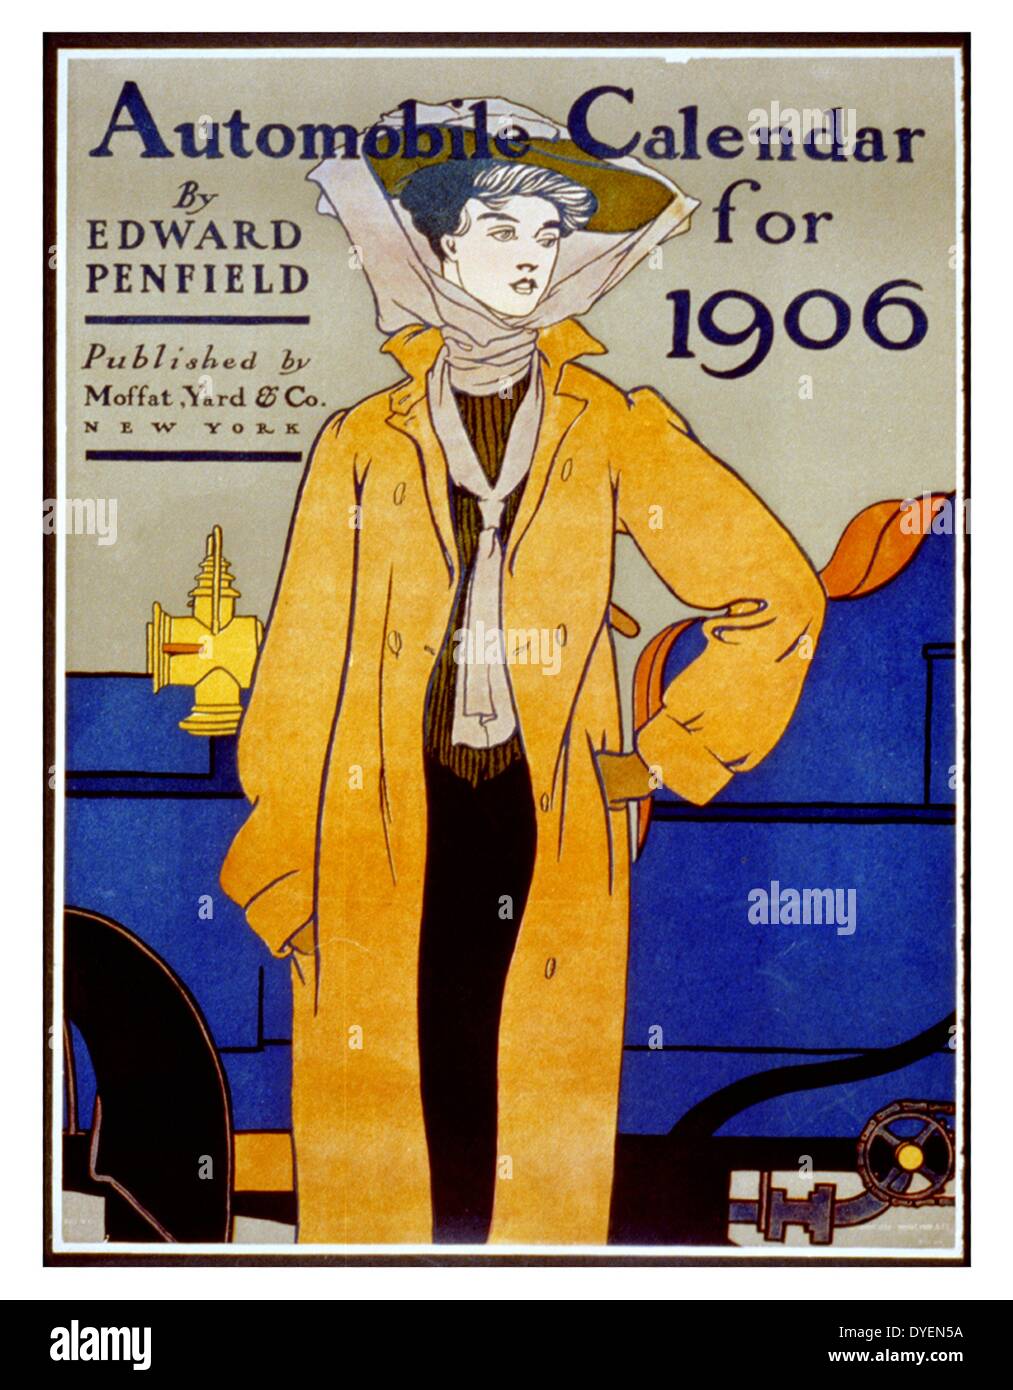 Automobile calendar for 1906 by Edward Penfield 1866-1925, American artist. Published: N.Y. c1905. (poster) or lithograph, in colour. Poster shows a woman wearing a driving coat, gloves, and a hat secured by a scarf, and partial view of automobile in background. Stock Photo